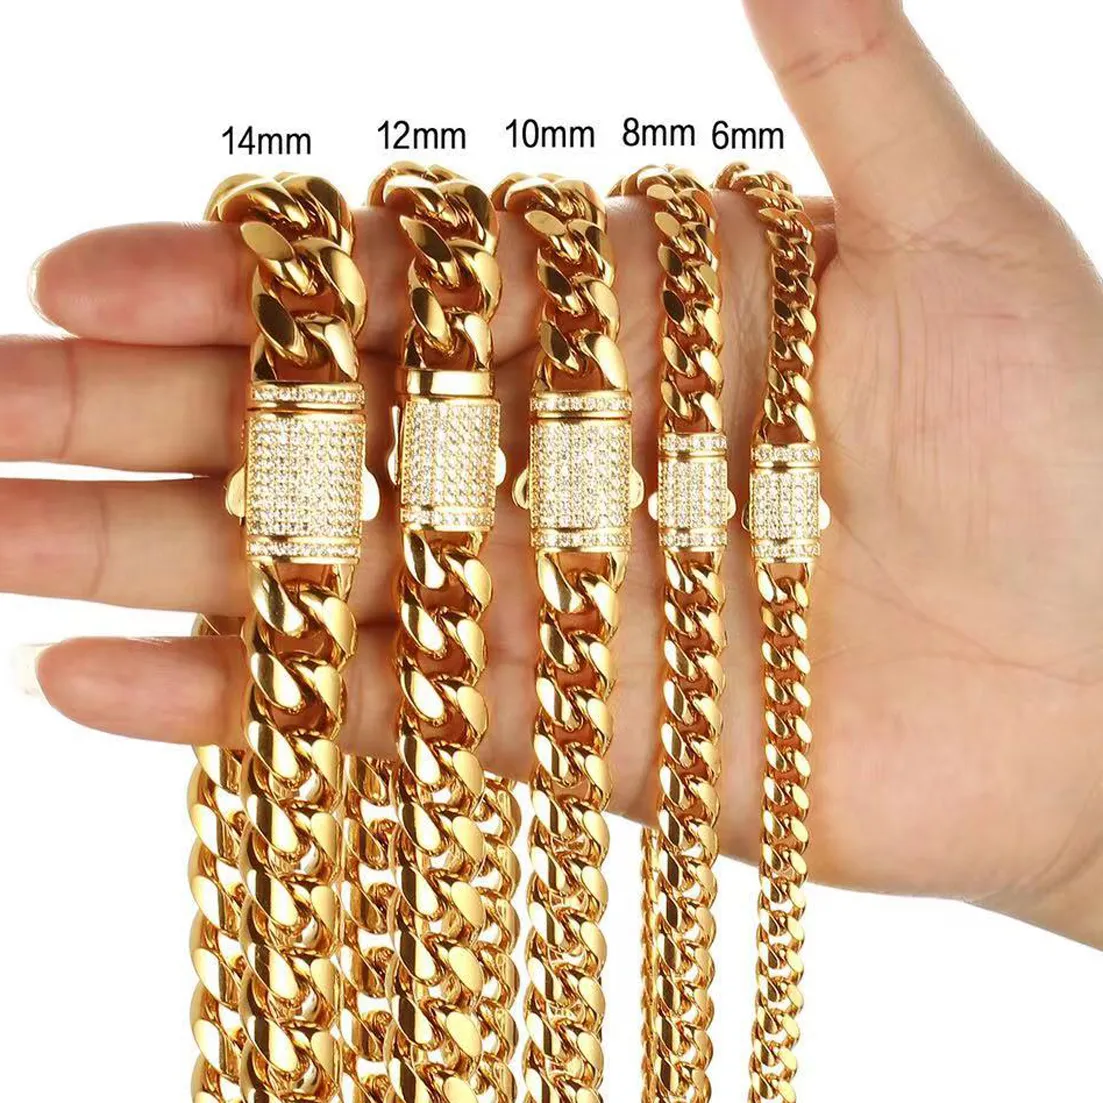 New Arrival 6mm-18mm Any Length 316L Stainless Steel Miami Curb Cuban Chain Necklace for Men & Women Gift Crystal Lock